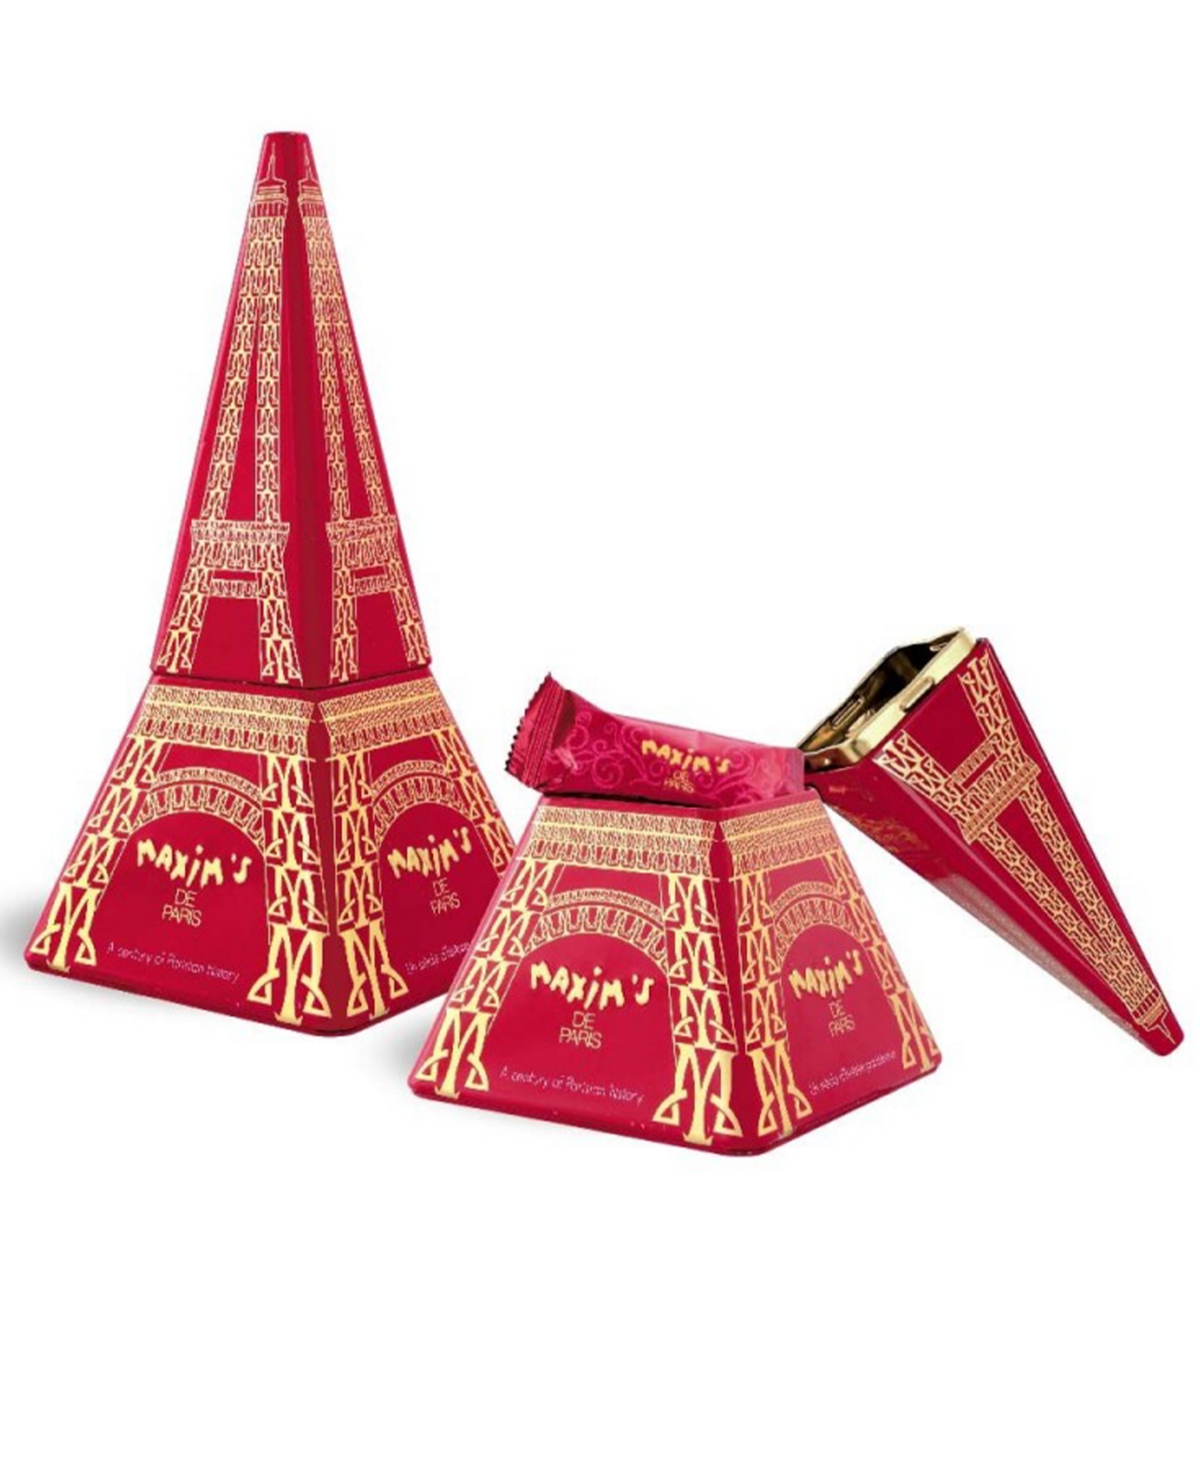 Maxim's De Paris Eiffel Tower Tin Box Filled With Milk Chocolate Covered Crispy Crepes, 14 Pieces In No Color